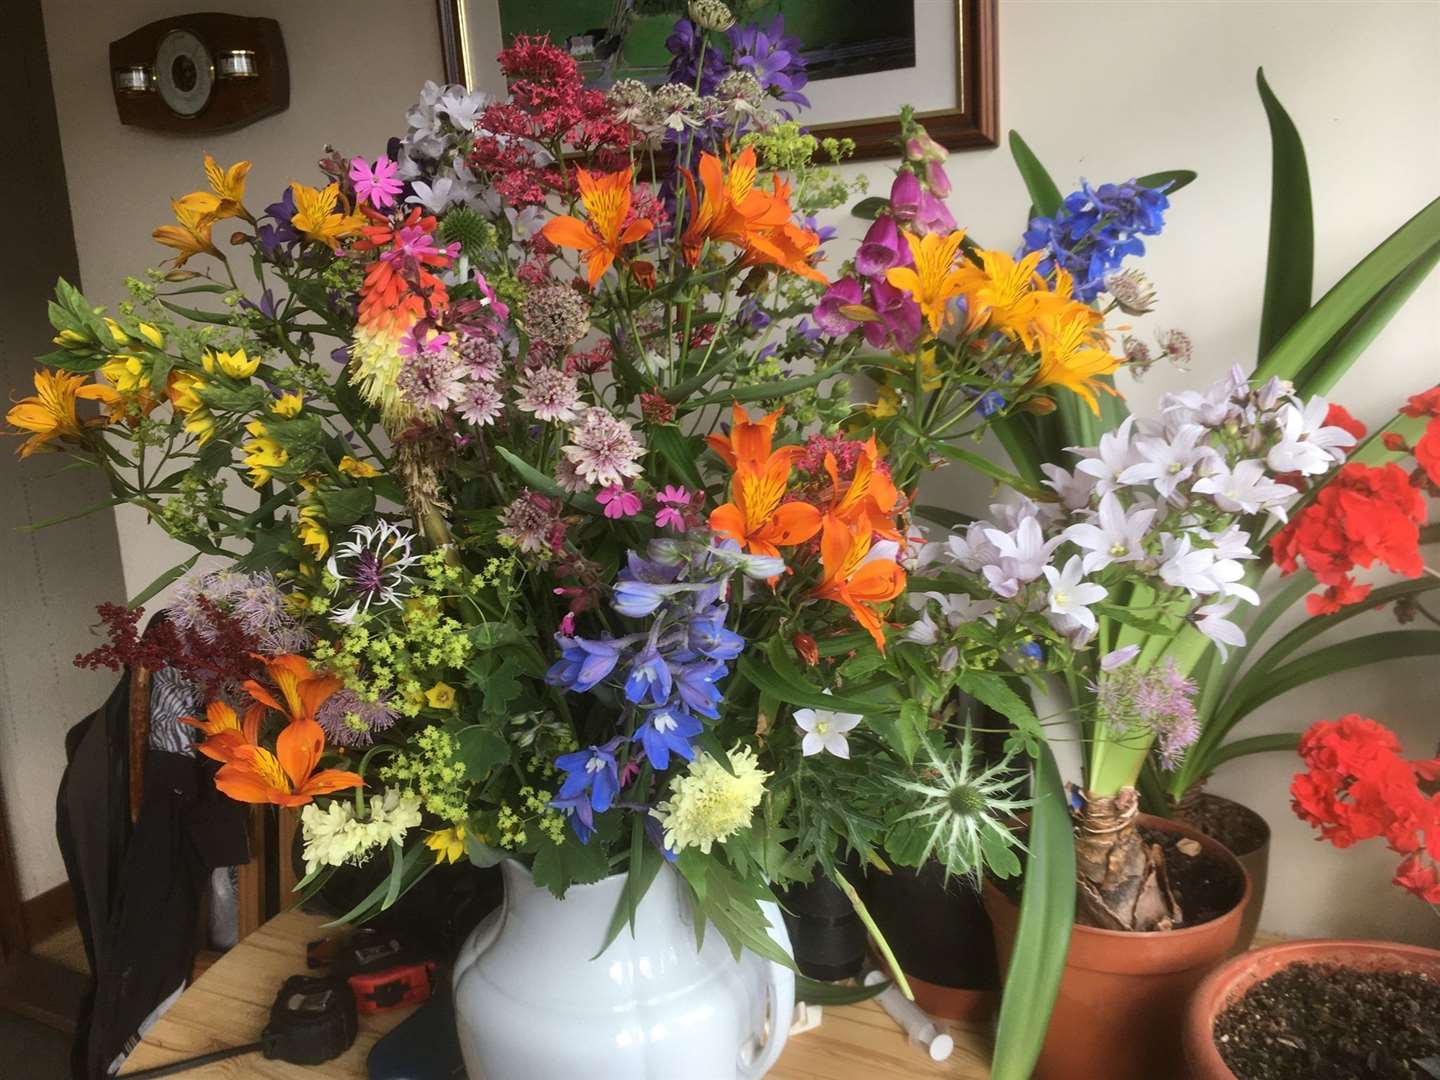 A popular entry in the class for a container of mixed herbaceous flowers skillfully arranged by Anne Gunn.